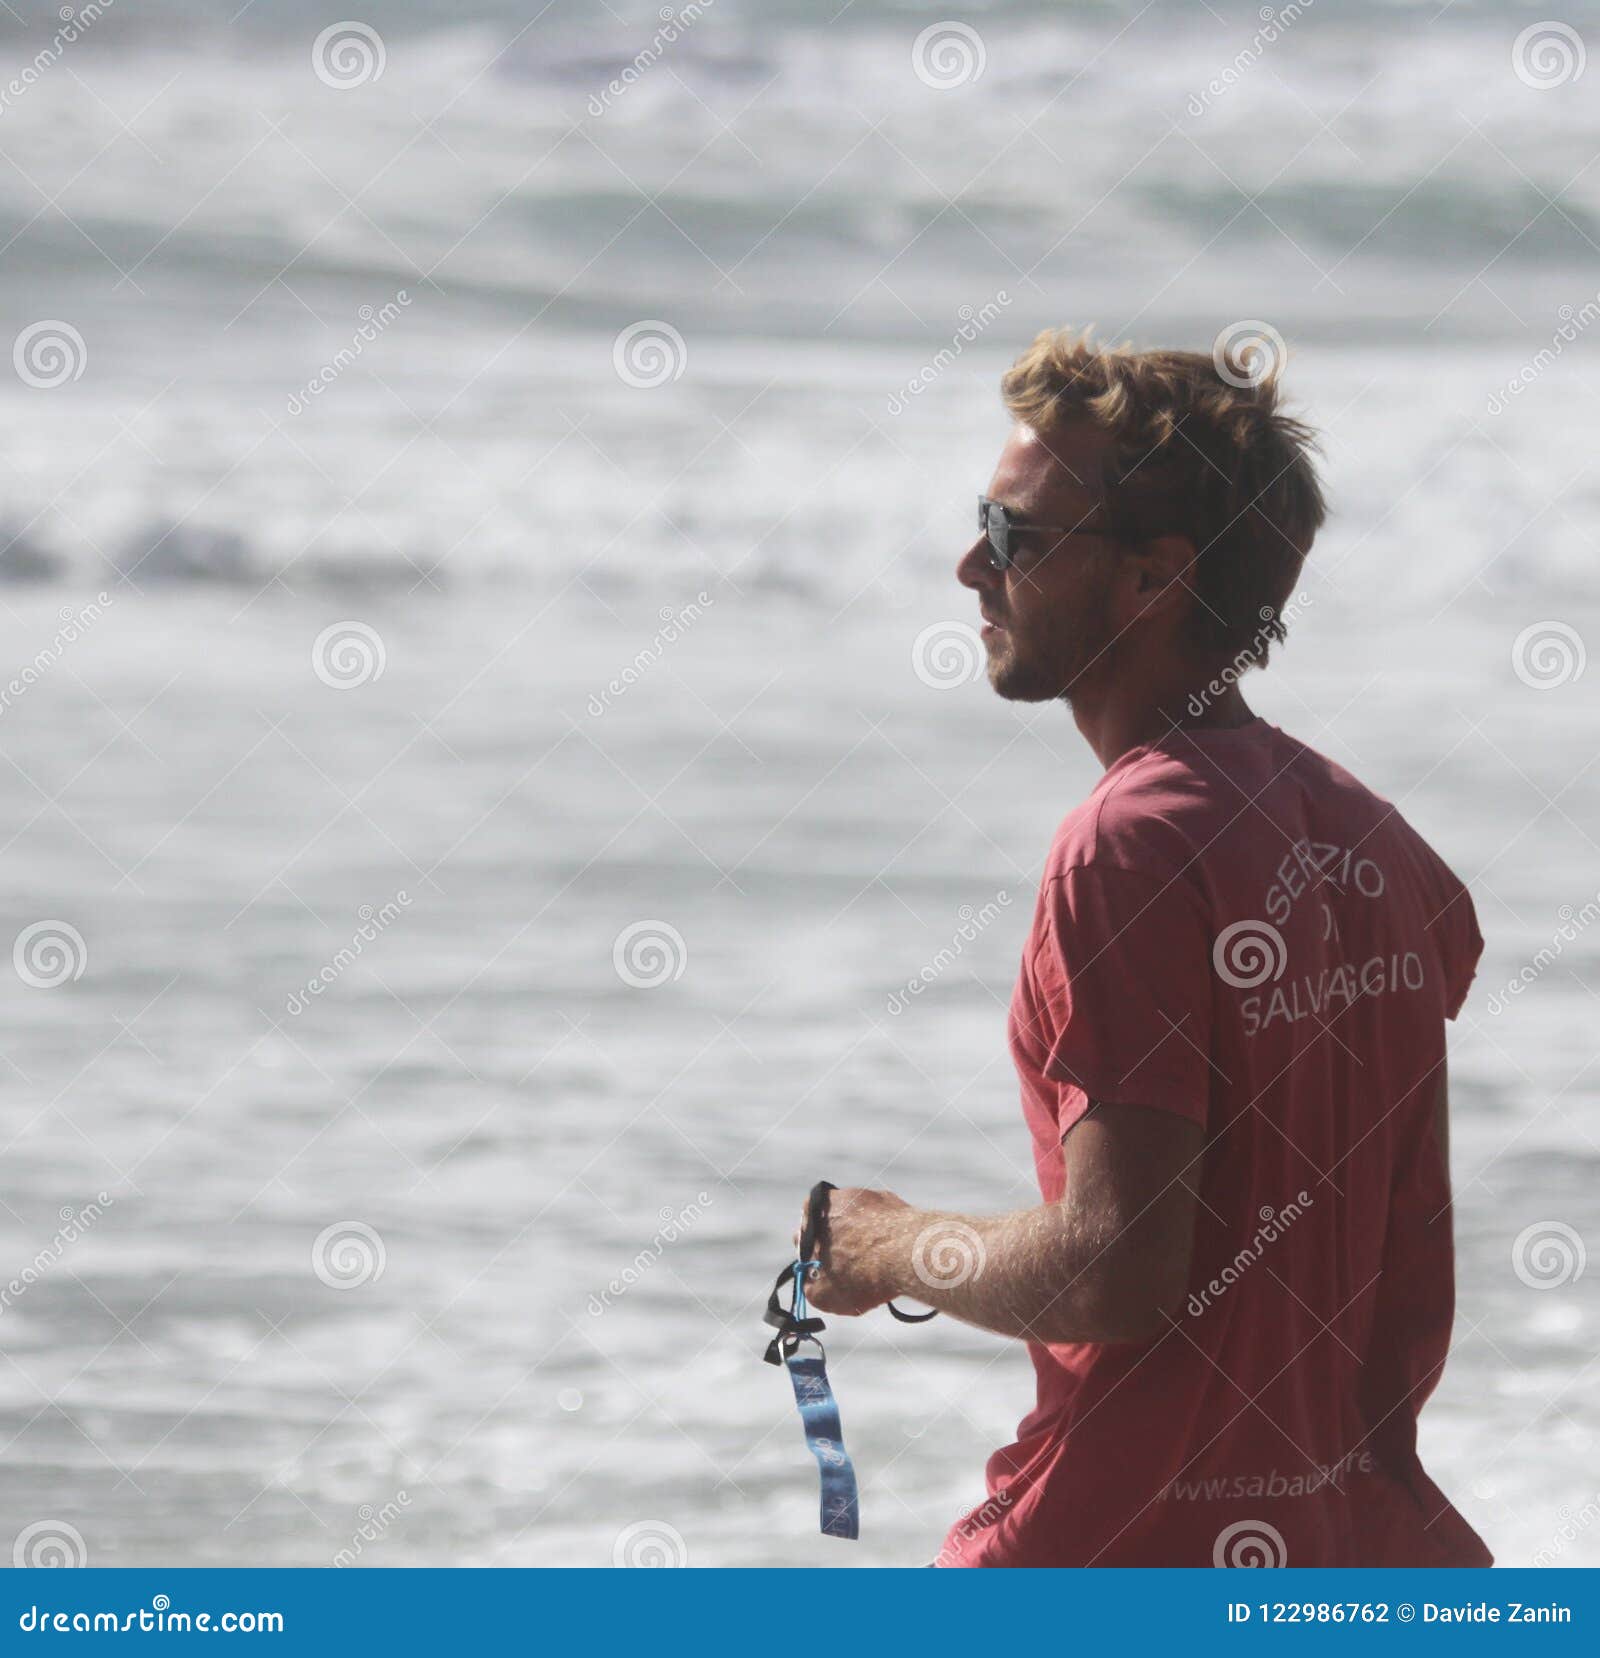 Lifeguard on the Beach Looking Carefully at the Sea. Rough Sea in the ...